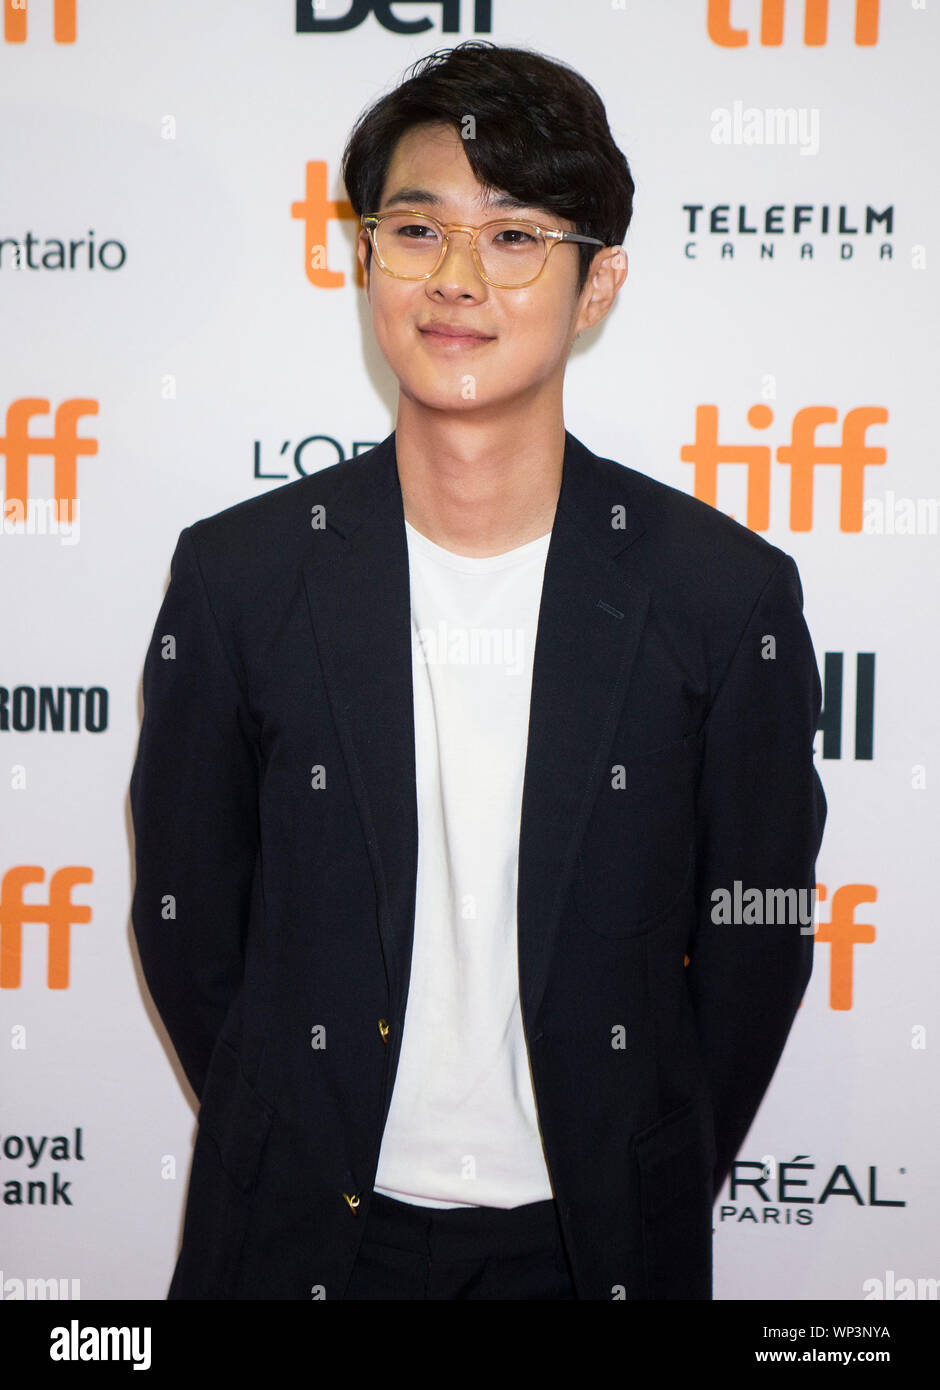 Toronto, Canada. 6th Sep, 2019. Actor Choi Woo-shik poses for photos before the Canadian premiere of the film 'Parasite' at Ryerson Theatre during the 2019 Toronto International Film Festival (TIFF) in Toronto, Canada, Sept. 6, 2019. Credit: Zou Zheng/Xinhua Stock Photo